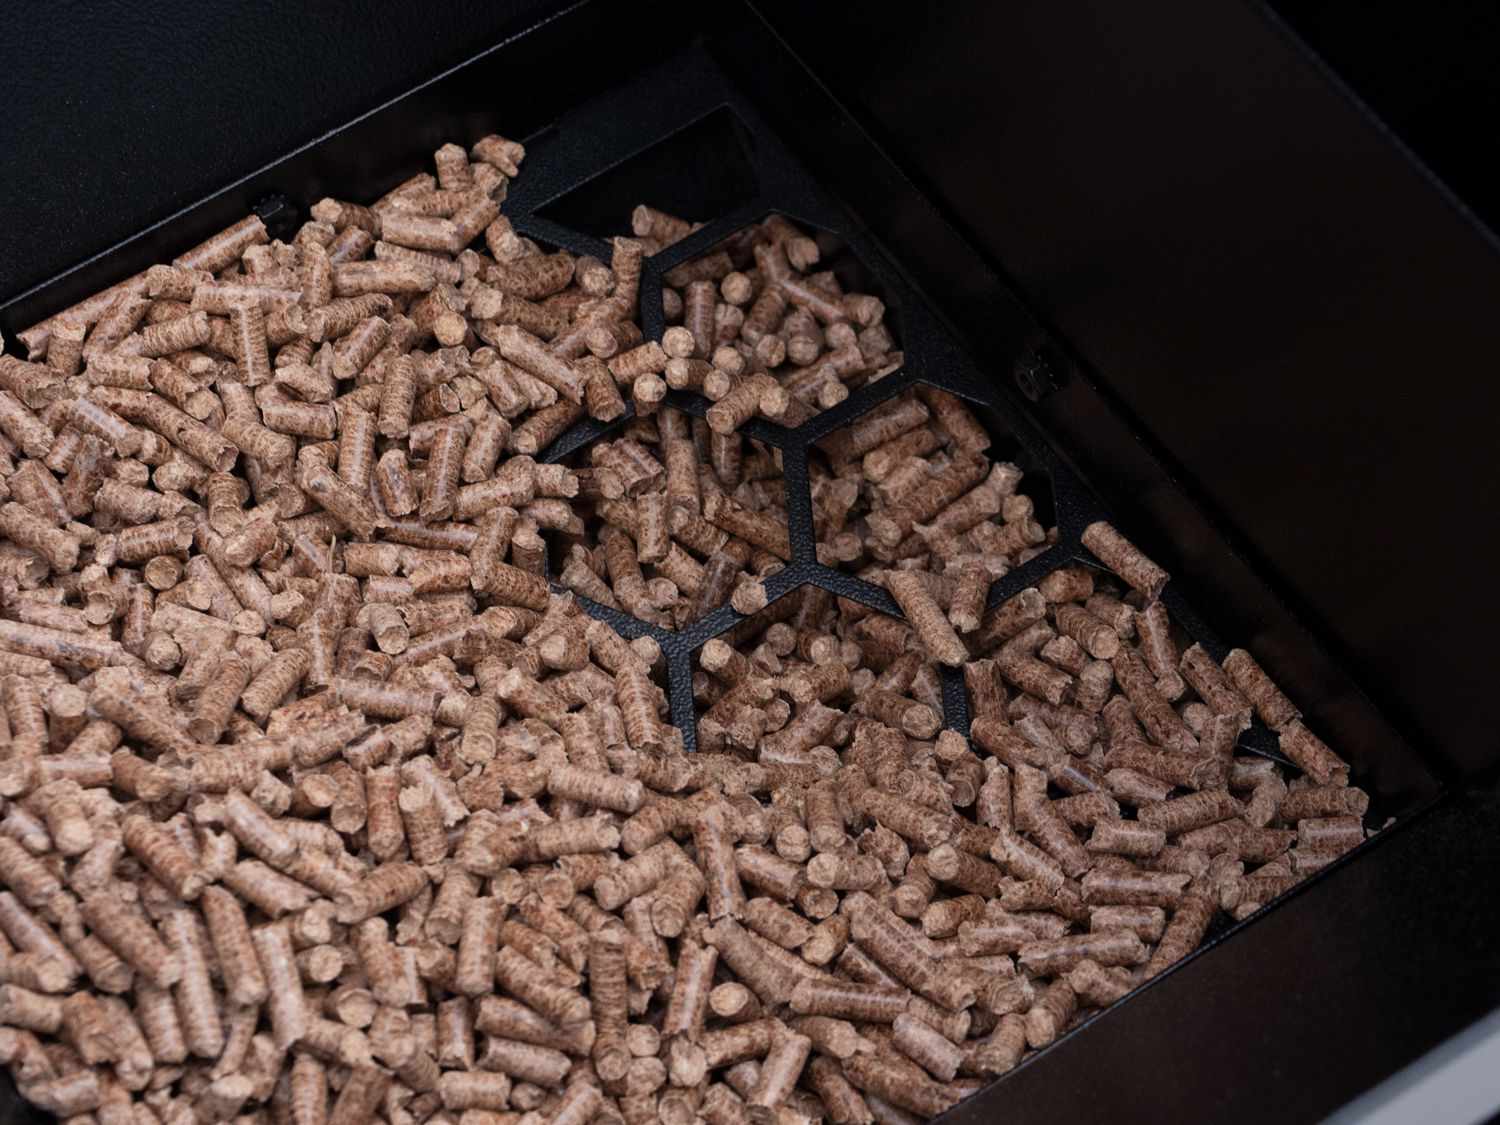 Wood pellets inside the Camp Chef SmokePro DLX Pellet Grill